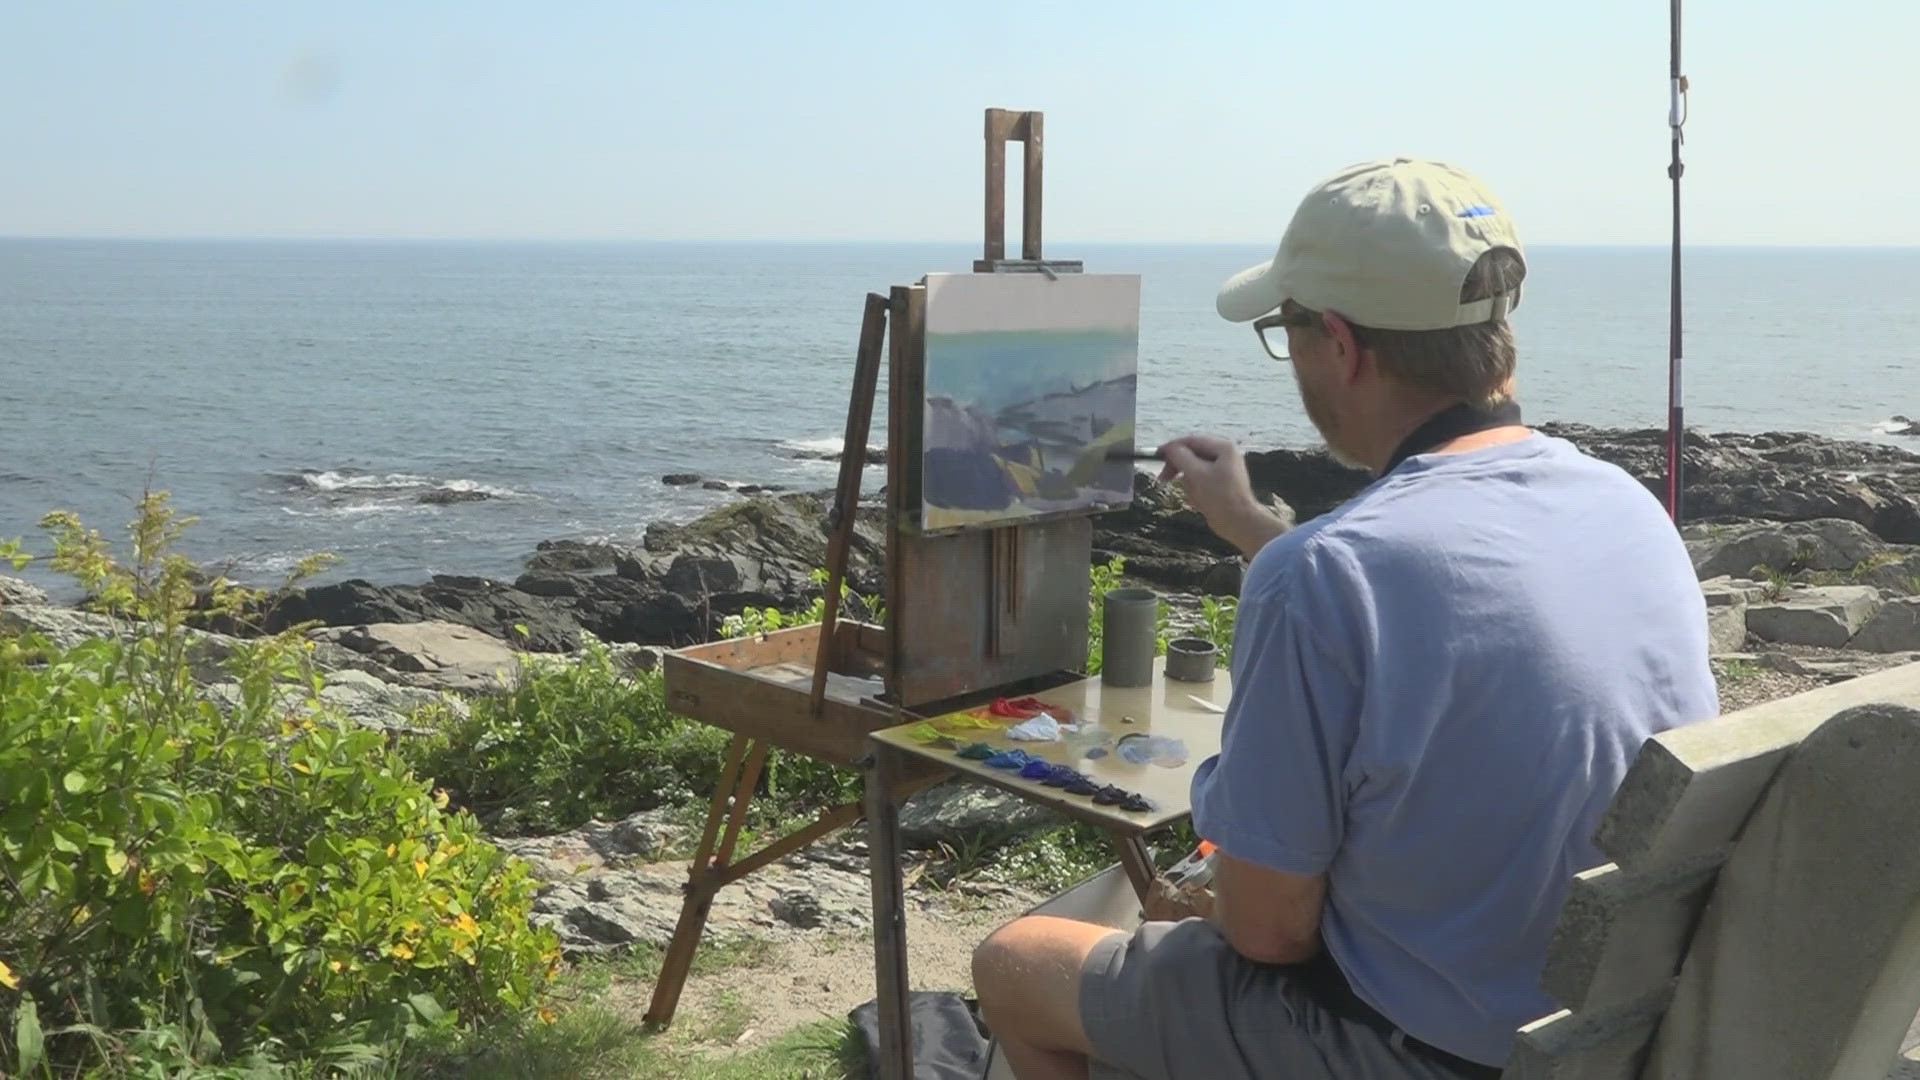 A total of 118 painters took out their easels and canvases, painting a scene of their choosing.